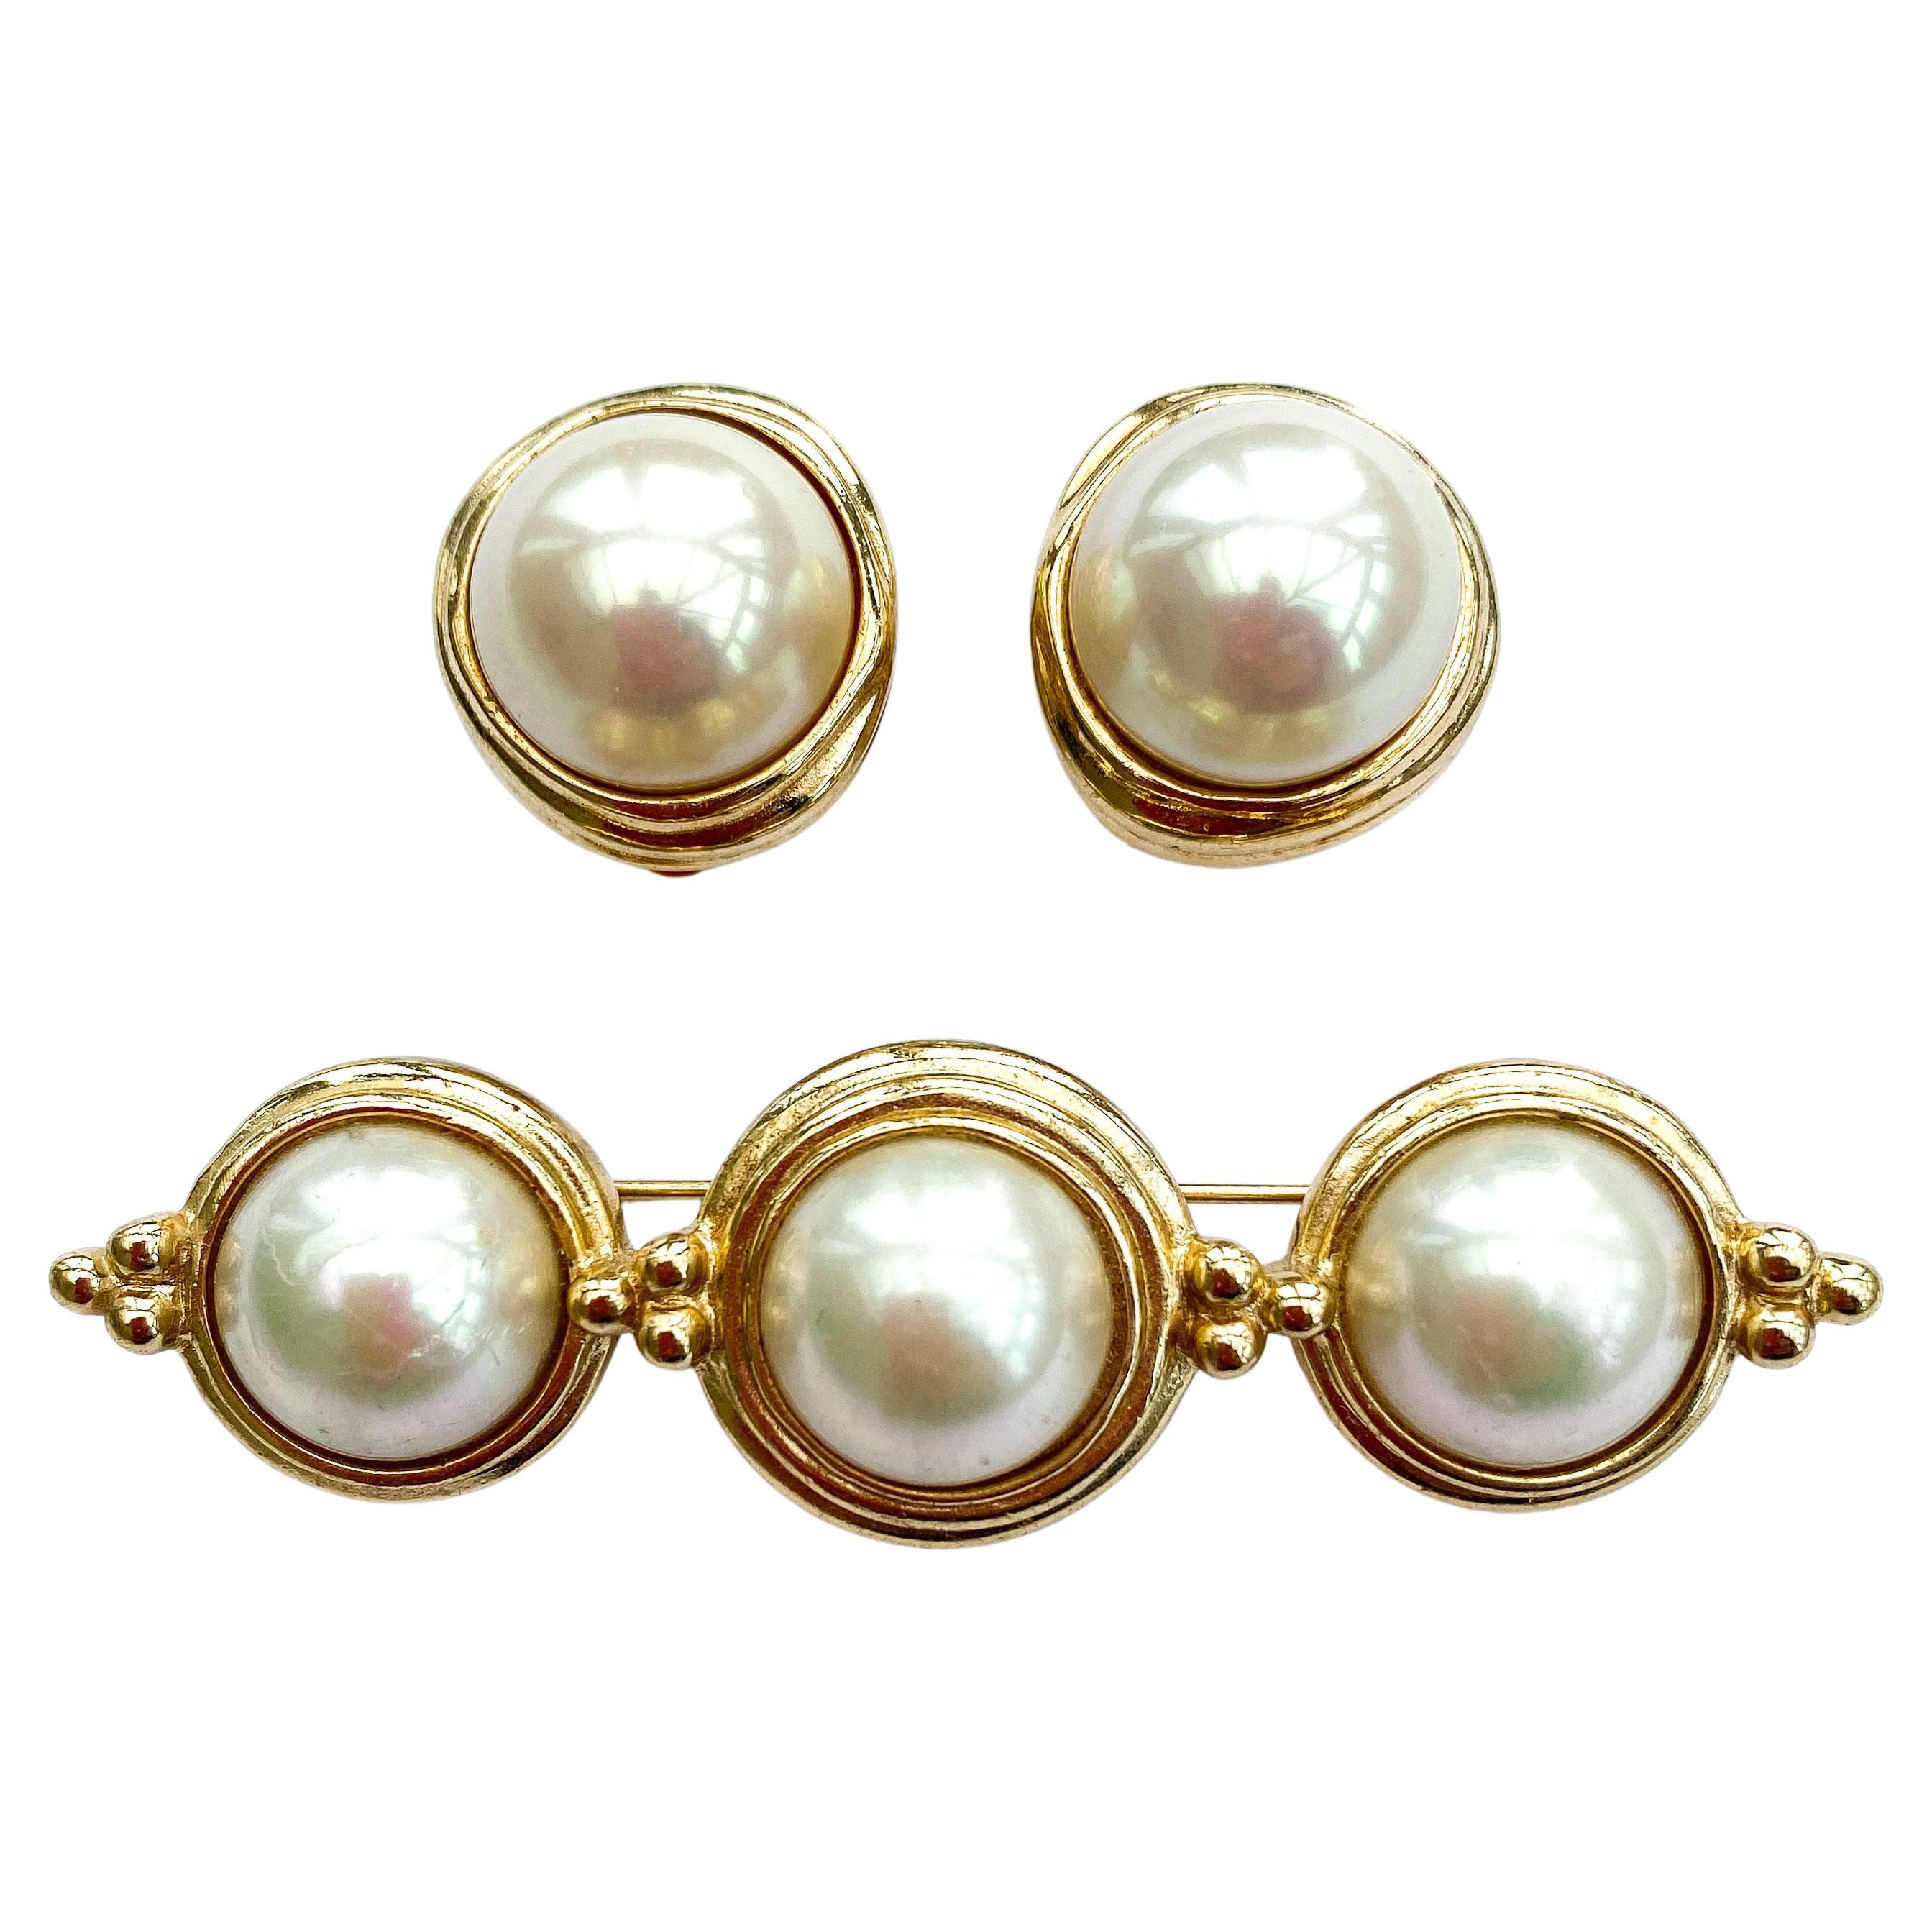 A paste pearl and gilt metal bar brooch and matching earrings, C. Dior, 1980s. For Sale